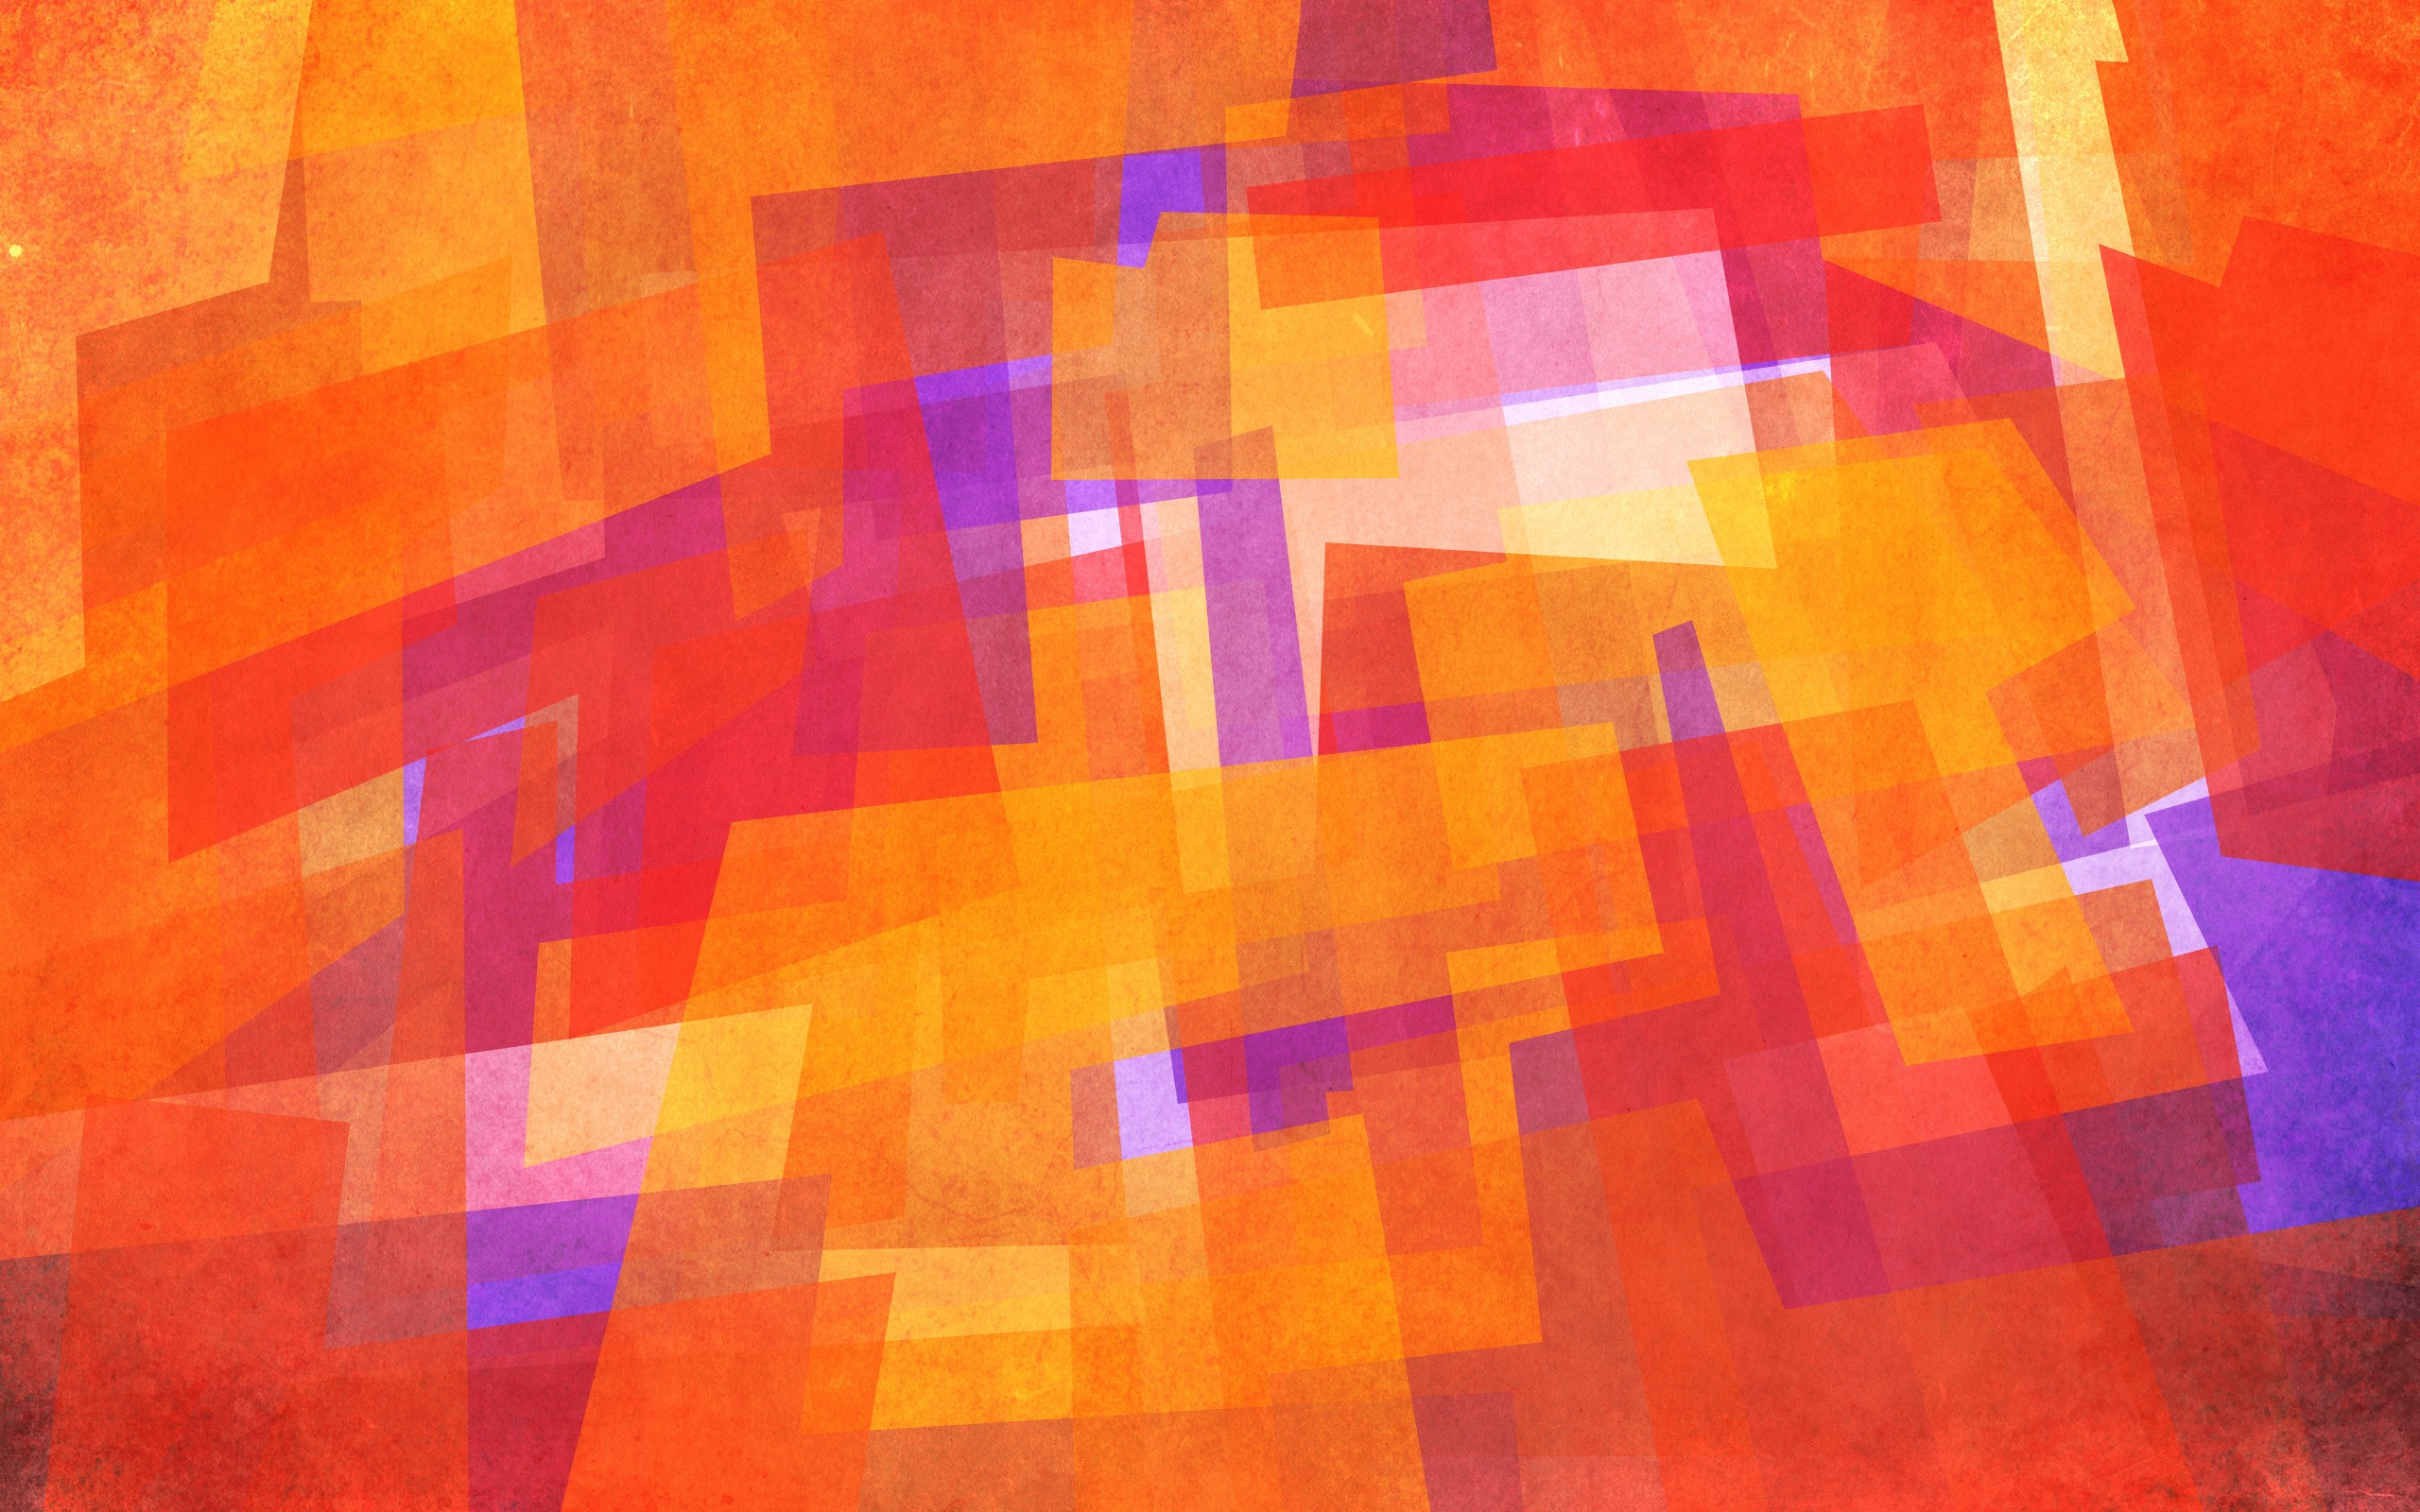 Abstract Colorful Wallpaper 2560x1600 Abstract Colorful Textures